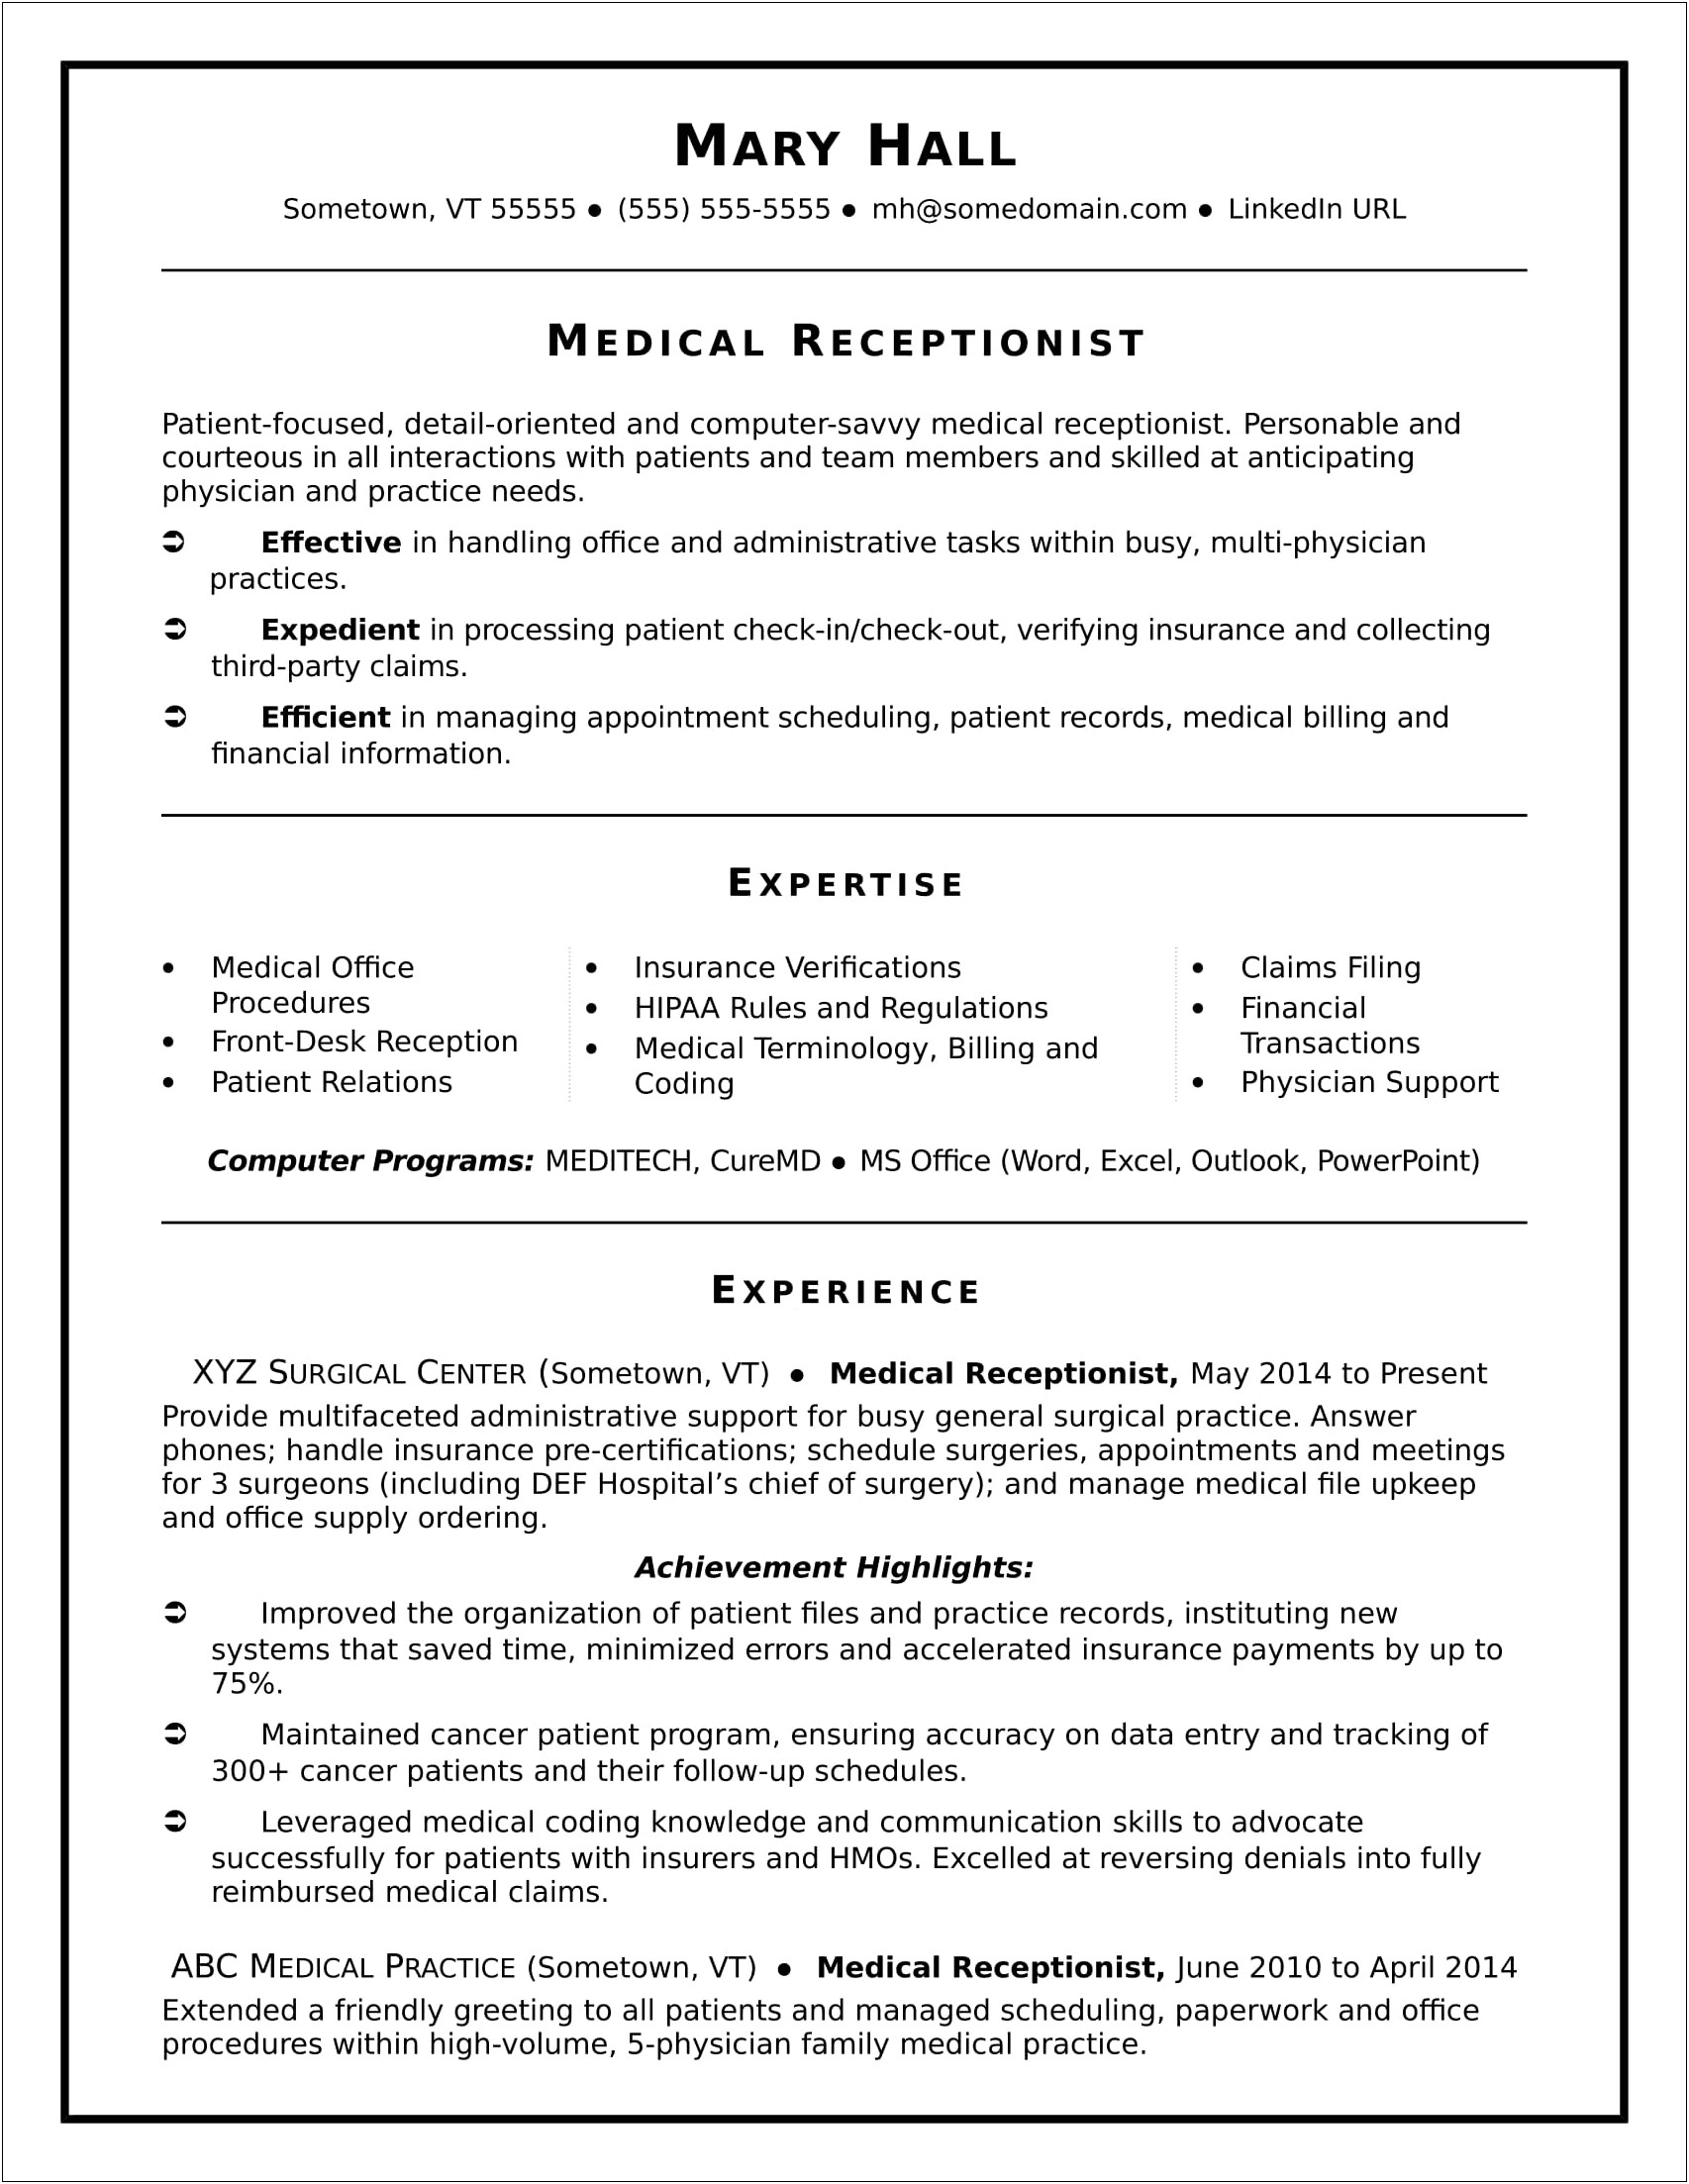 Resume Objective For Medical Assistant Position